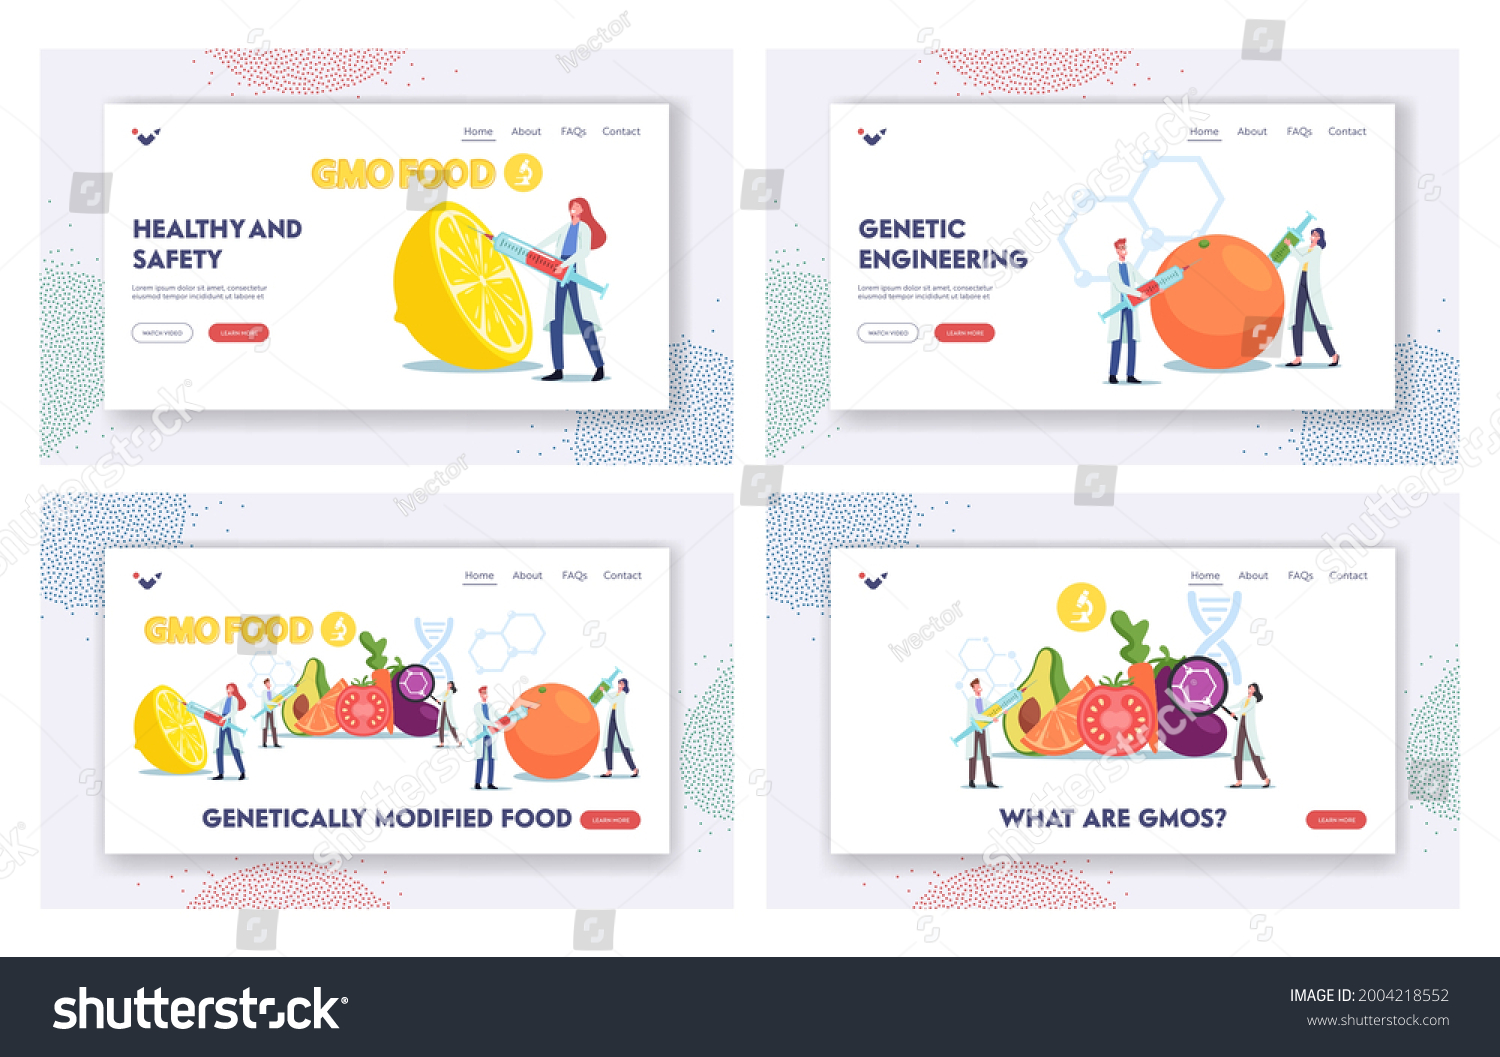 Genetically Modified Food Landing Page Template - Royalty Free Stock ...